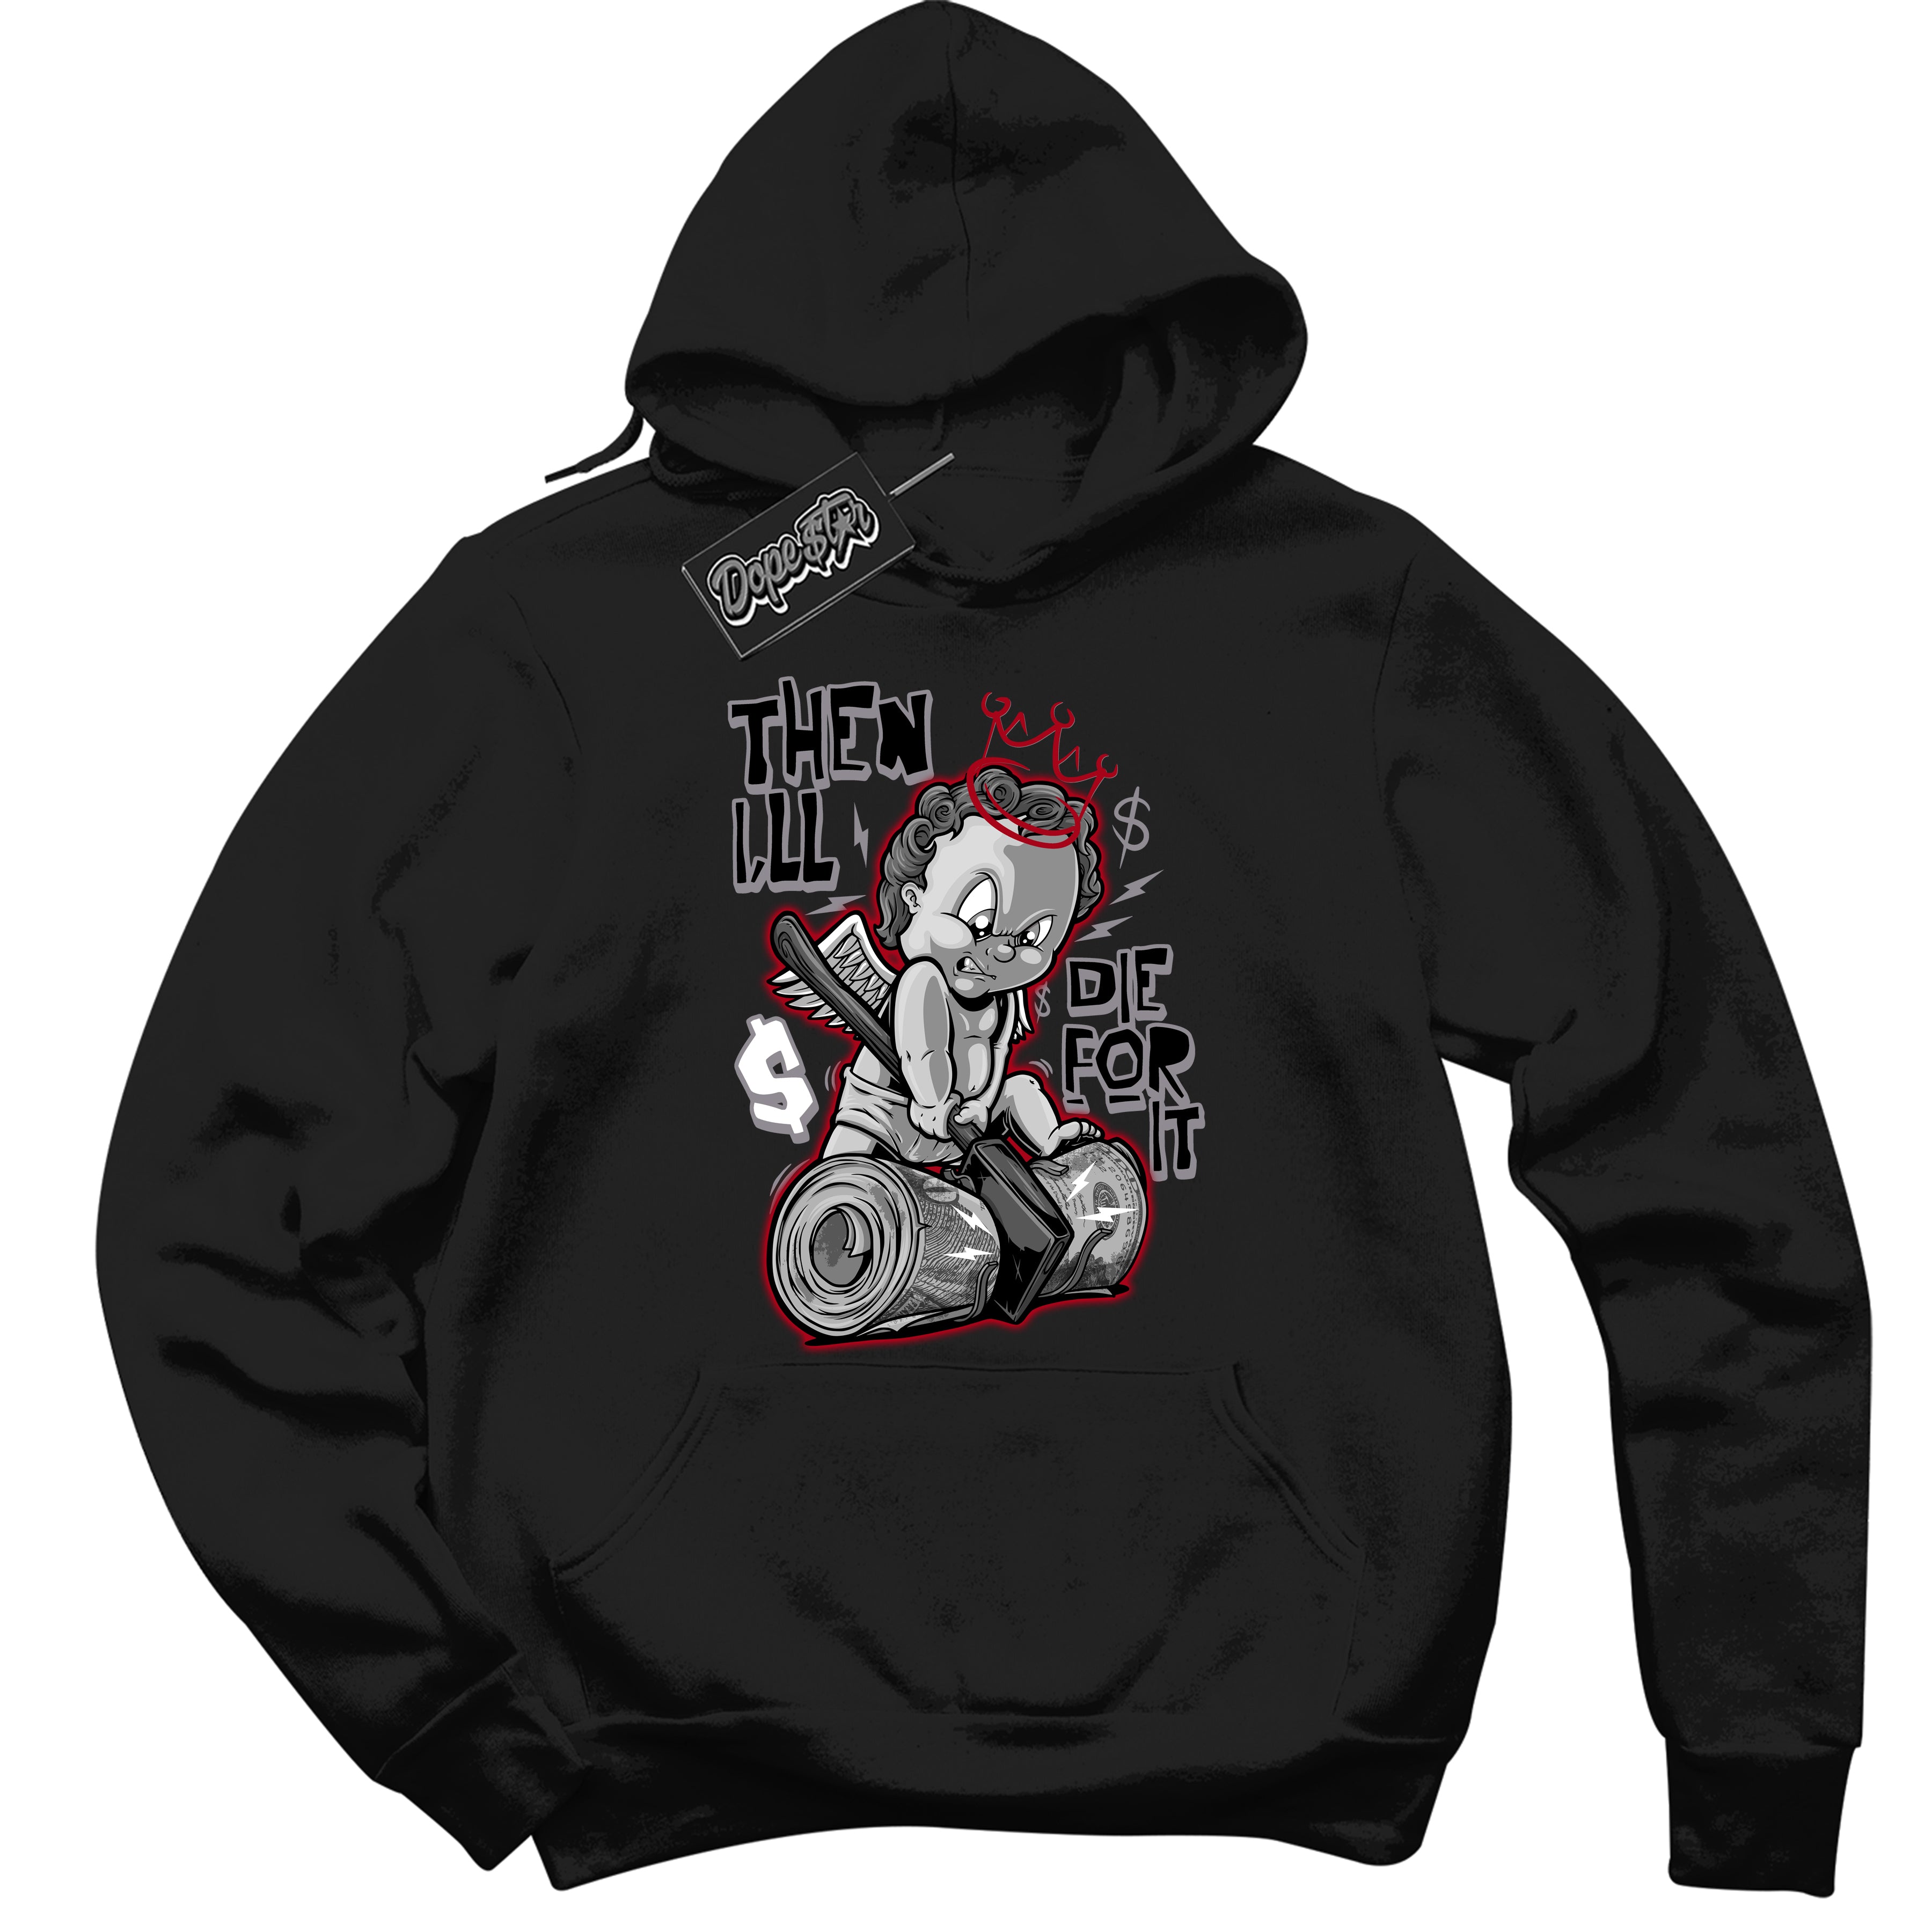 Cool Black Hoodie with “ Then I'll ”  design that Perfectly Matches  Bred Reimagined 4s Jordans.